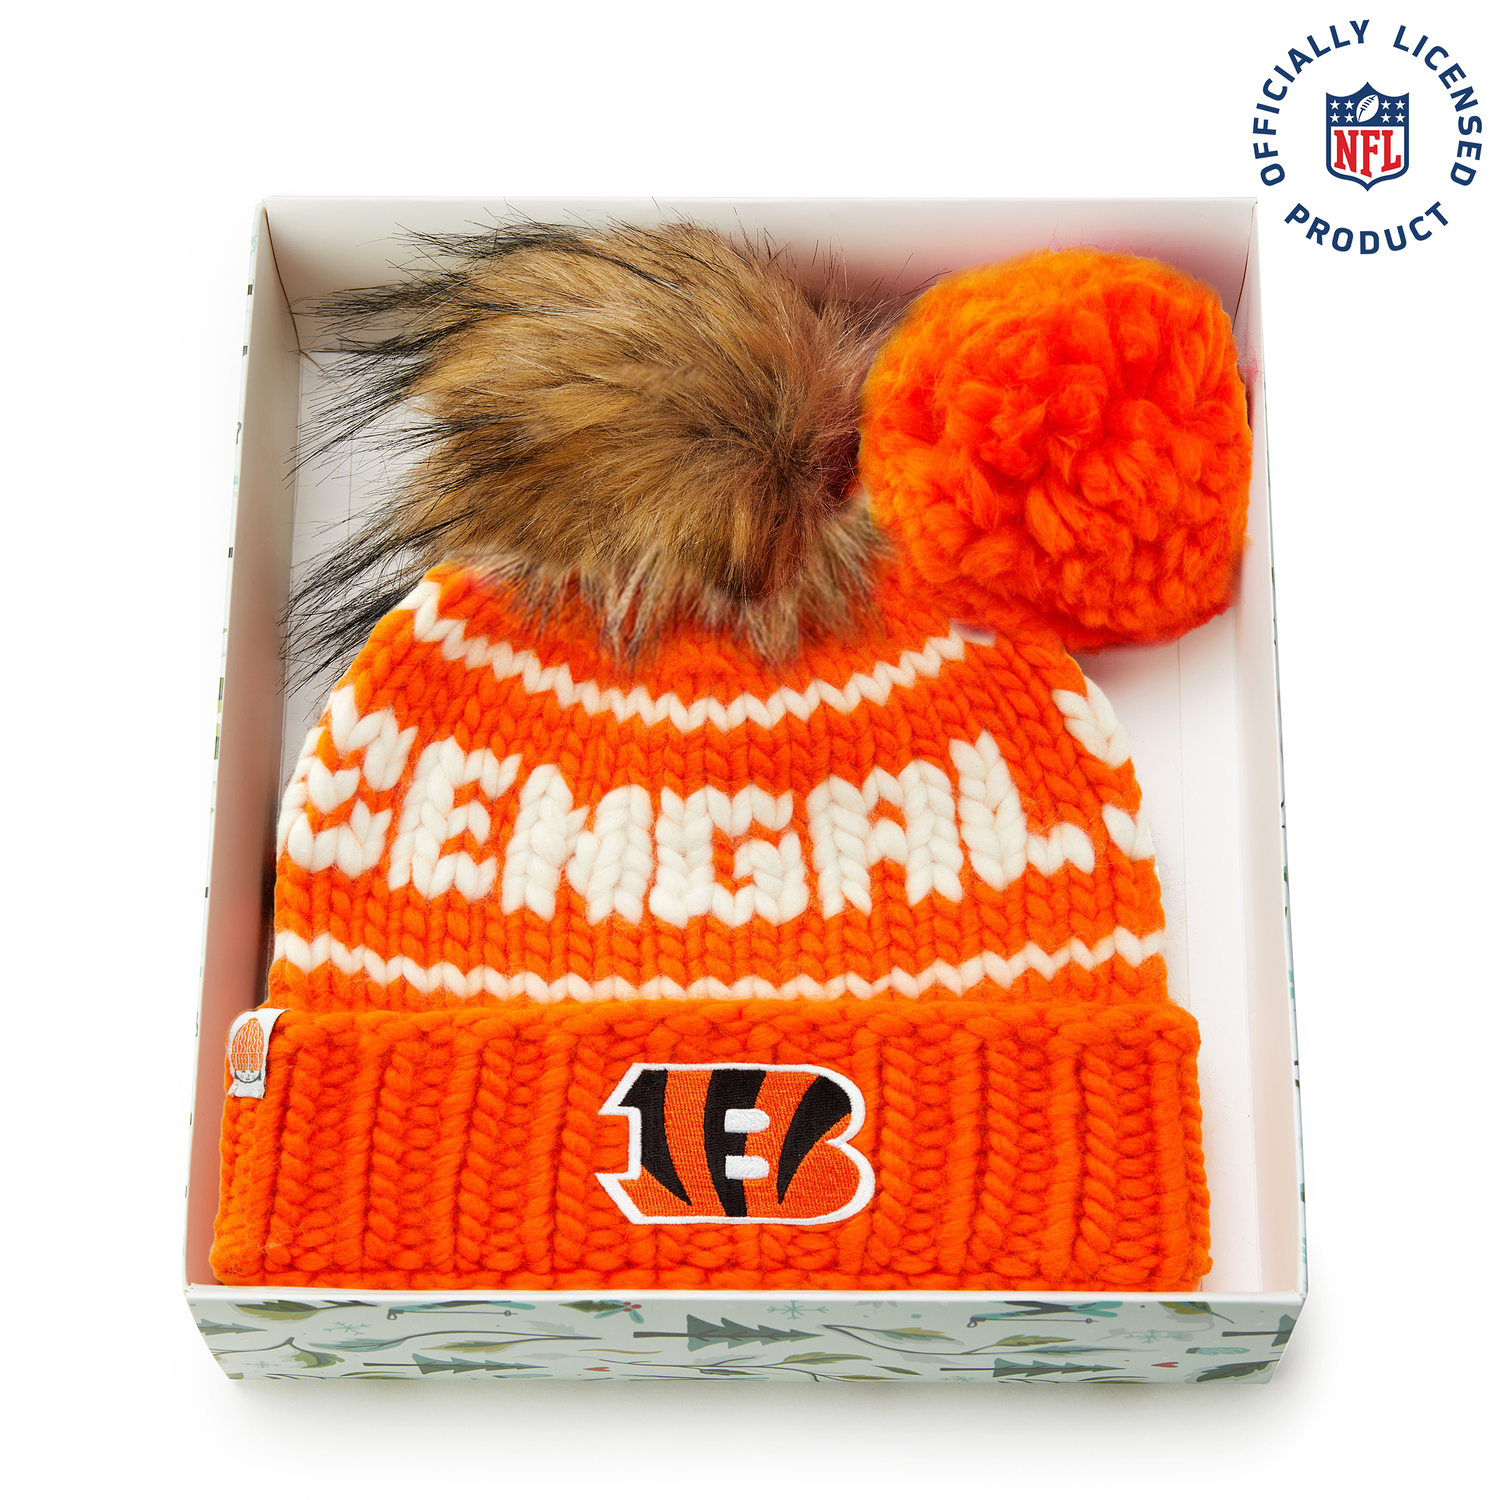 The Bengals NFL Beanie Gift Set